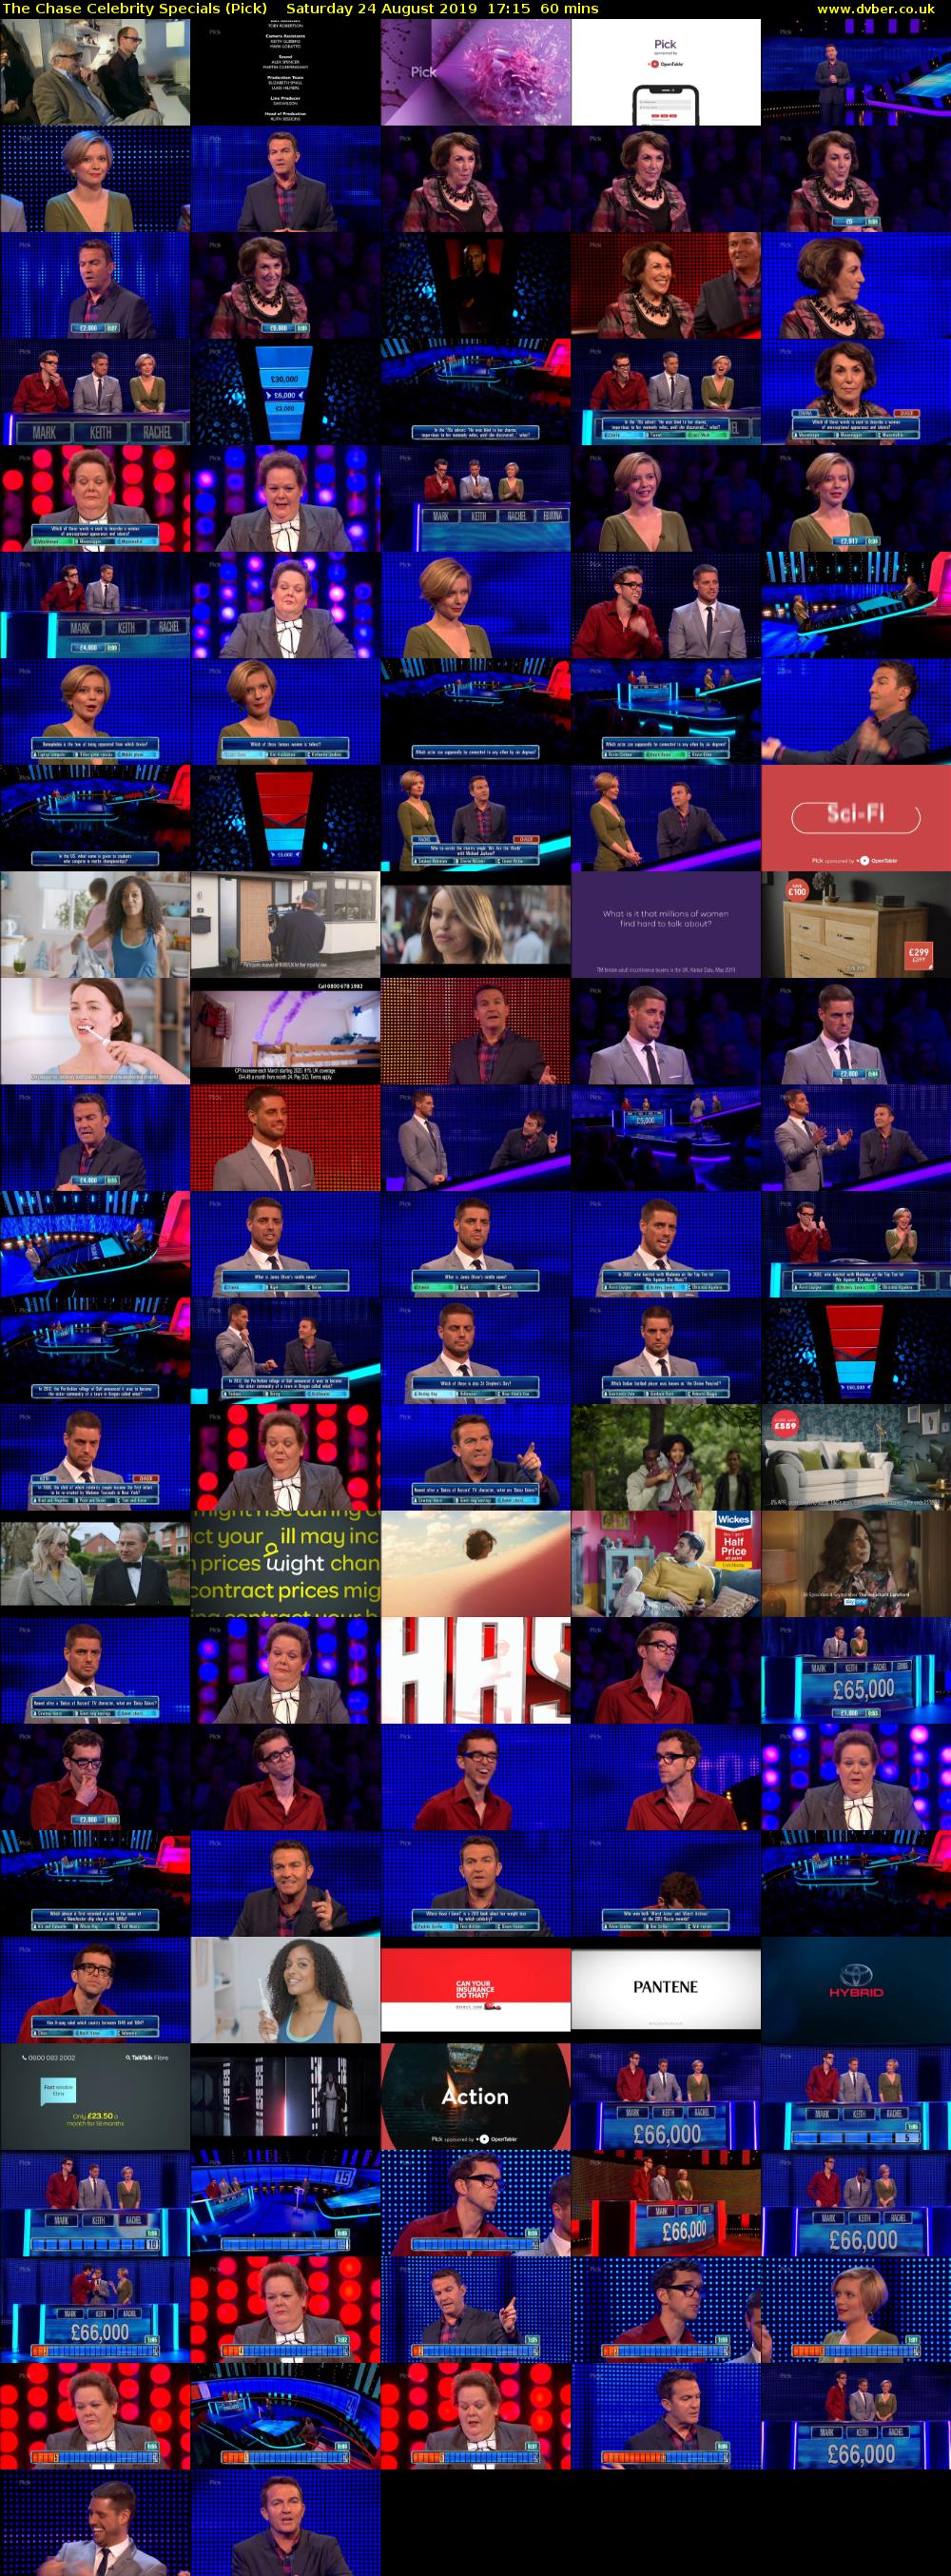 The Chase Celebrity Specials (Pick) Saturday 24 August 2019 17:15 - 18:15